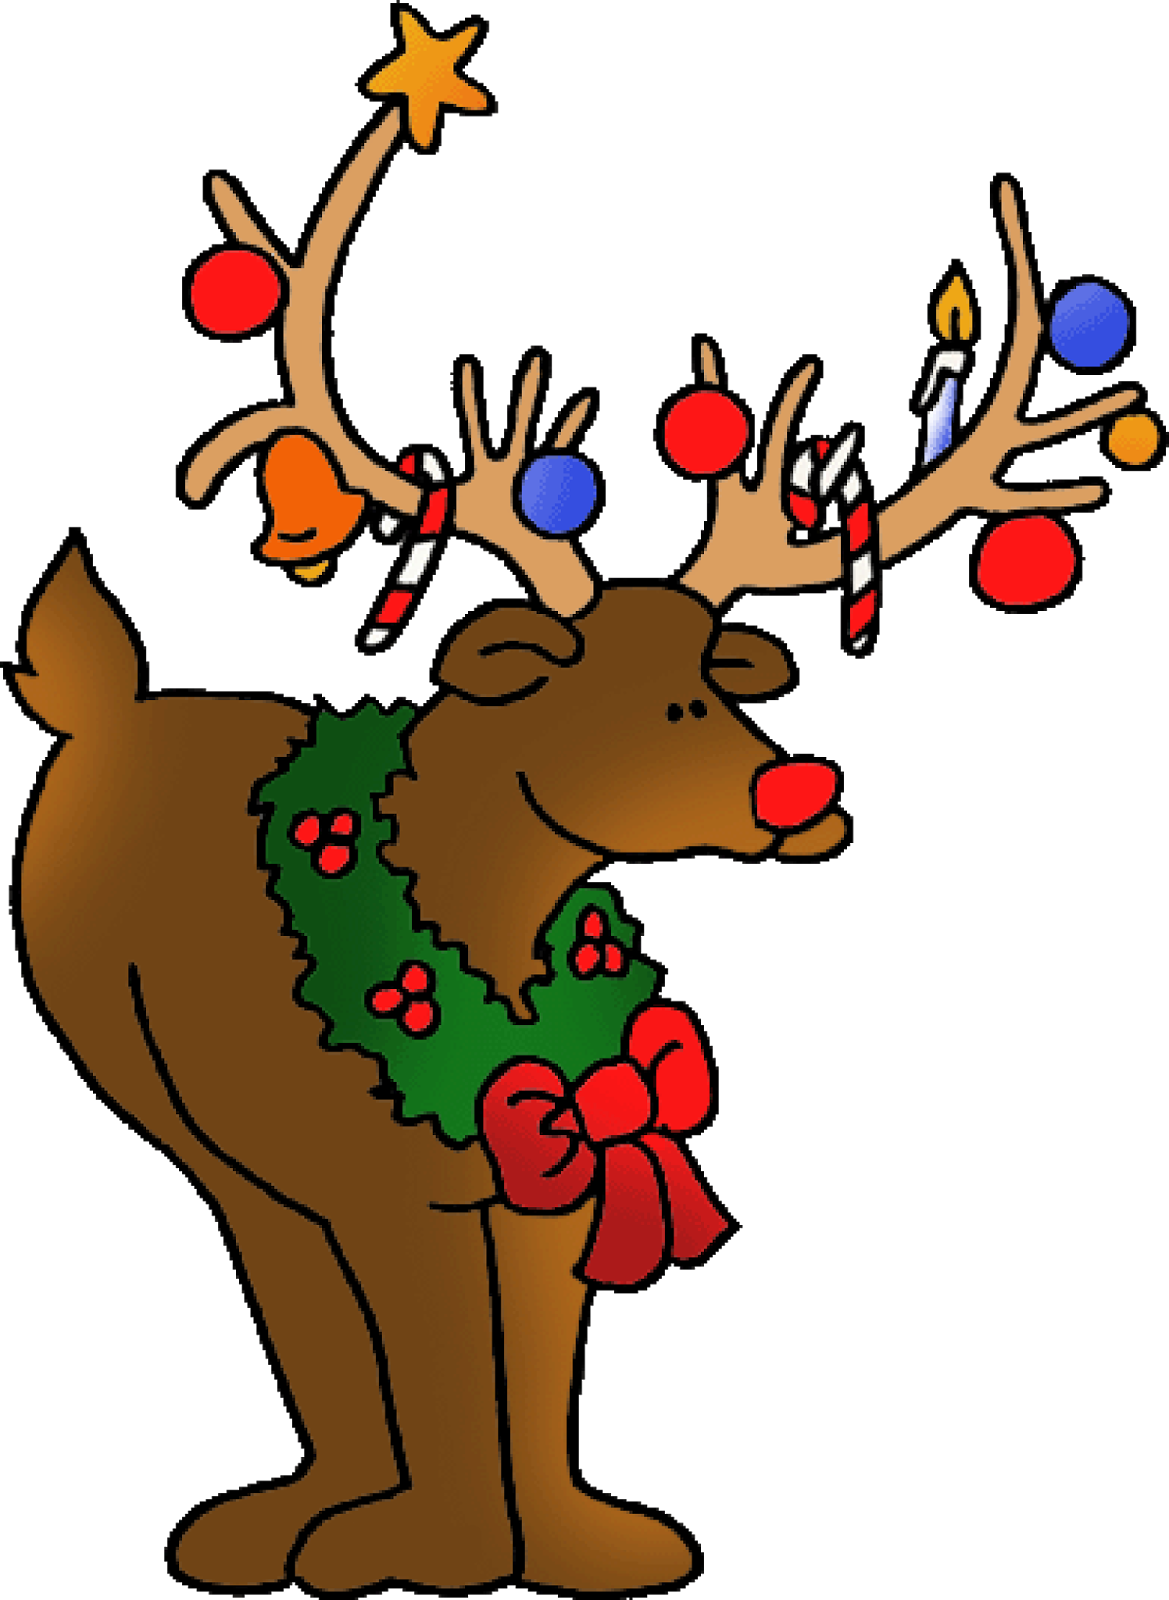 A Cartoon Of A Reindeer With Christmas Decorations